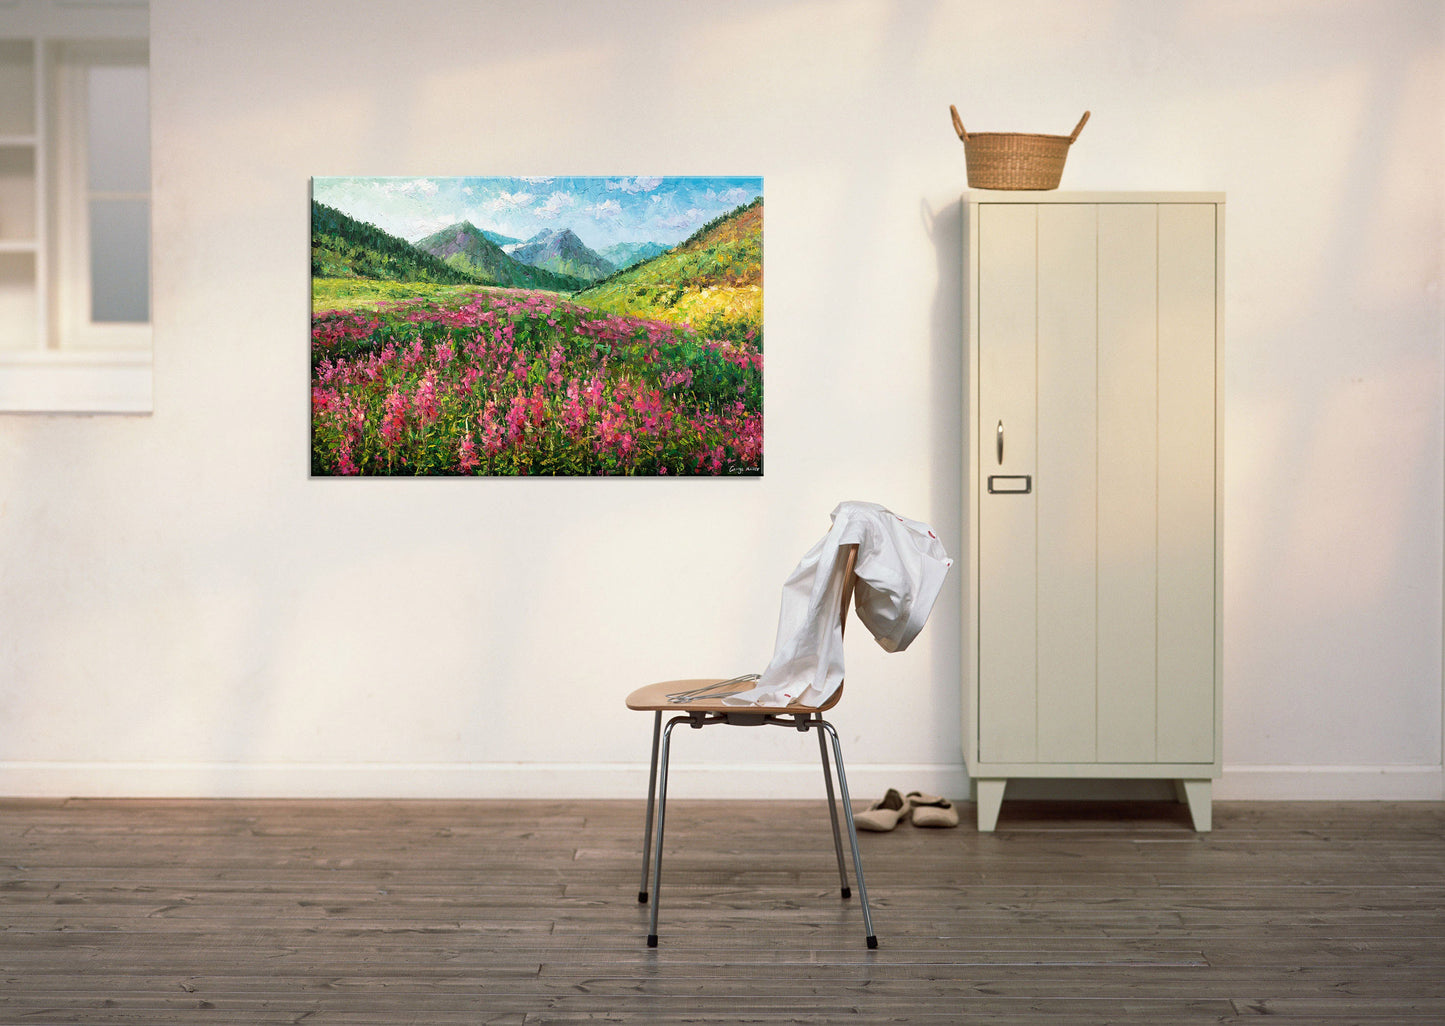 Handmade Contemporary Art: Large Wall Art, 32x48in. Oil on Canvas Painting. Abstract Landscape with Flower Fields and Mountains